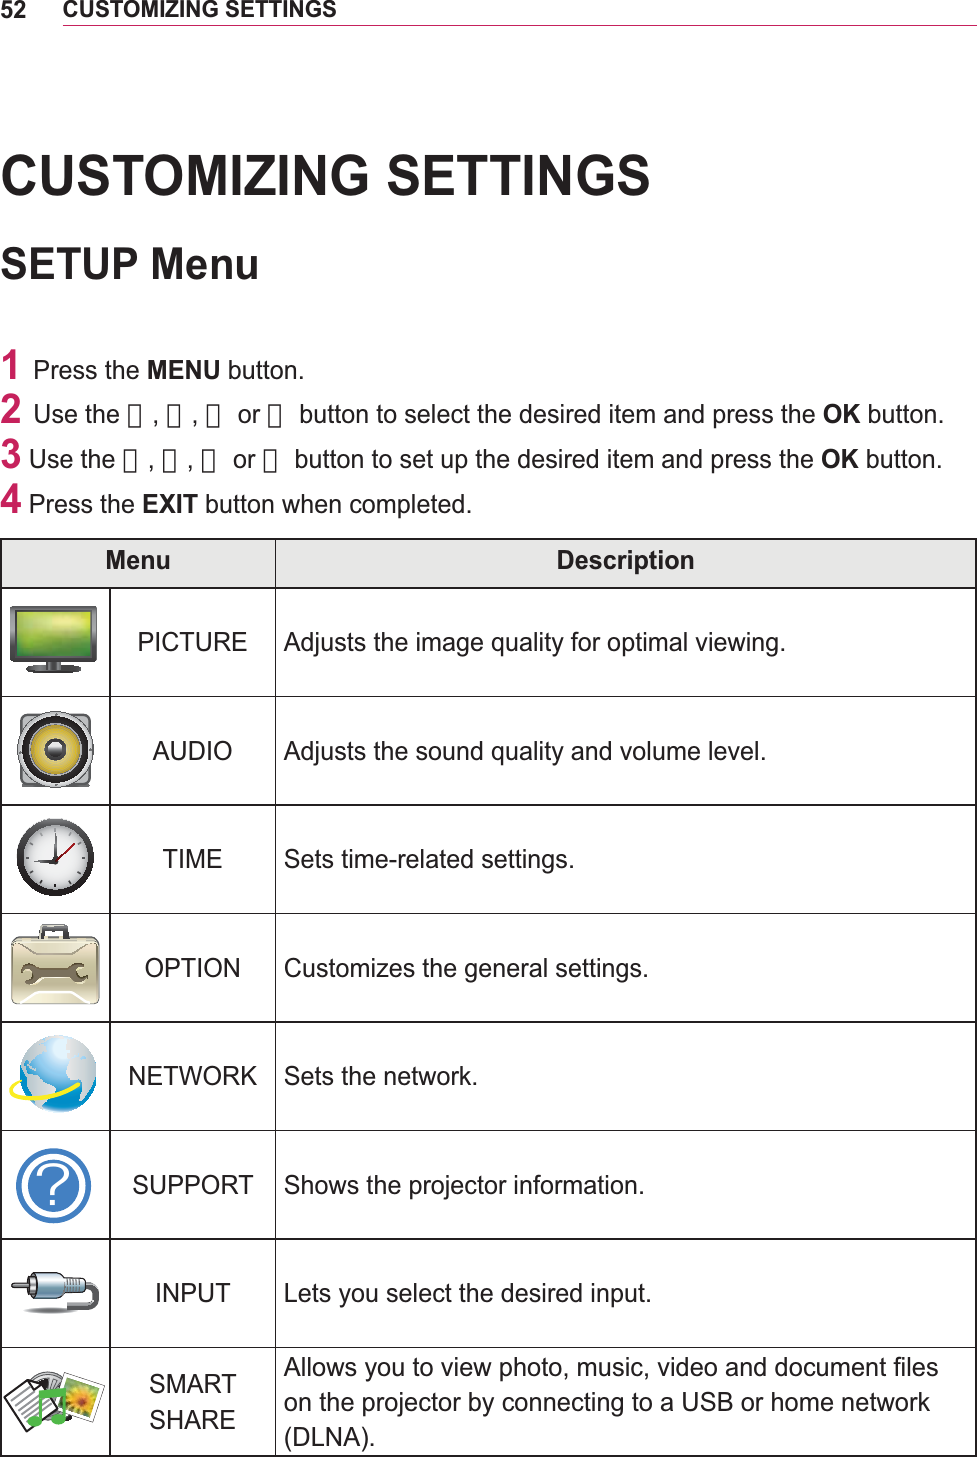 52CUSTOMIZING SETTINGSCUSTOMIZING SETTINGSSETUP Menu1 Press the MENU button.2 Use the 󱛨, 󱛩, 󱛦 or 󱛧 button to select the desired item and press the OK button.3 Use the 󱛨, 󱛩, 󱛦 or 󱛧 button to set up the desired item and press the OK button.4 Press the EXIT button when completed.Menu DescriptionPICTURE Adjusts the image quality for optimal viewing.AUDIO Adjusts the sound quality and volume level.TIME Sets time-related settings.OPTION Customizes the general settings. Sets the network.ͰSUPPORT Shows the projector information.INPUT Lets you select the desired input.SMART Allows you to view photo, music, video and document files on the projector by connecting to a USB or home network (DLNA).